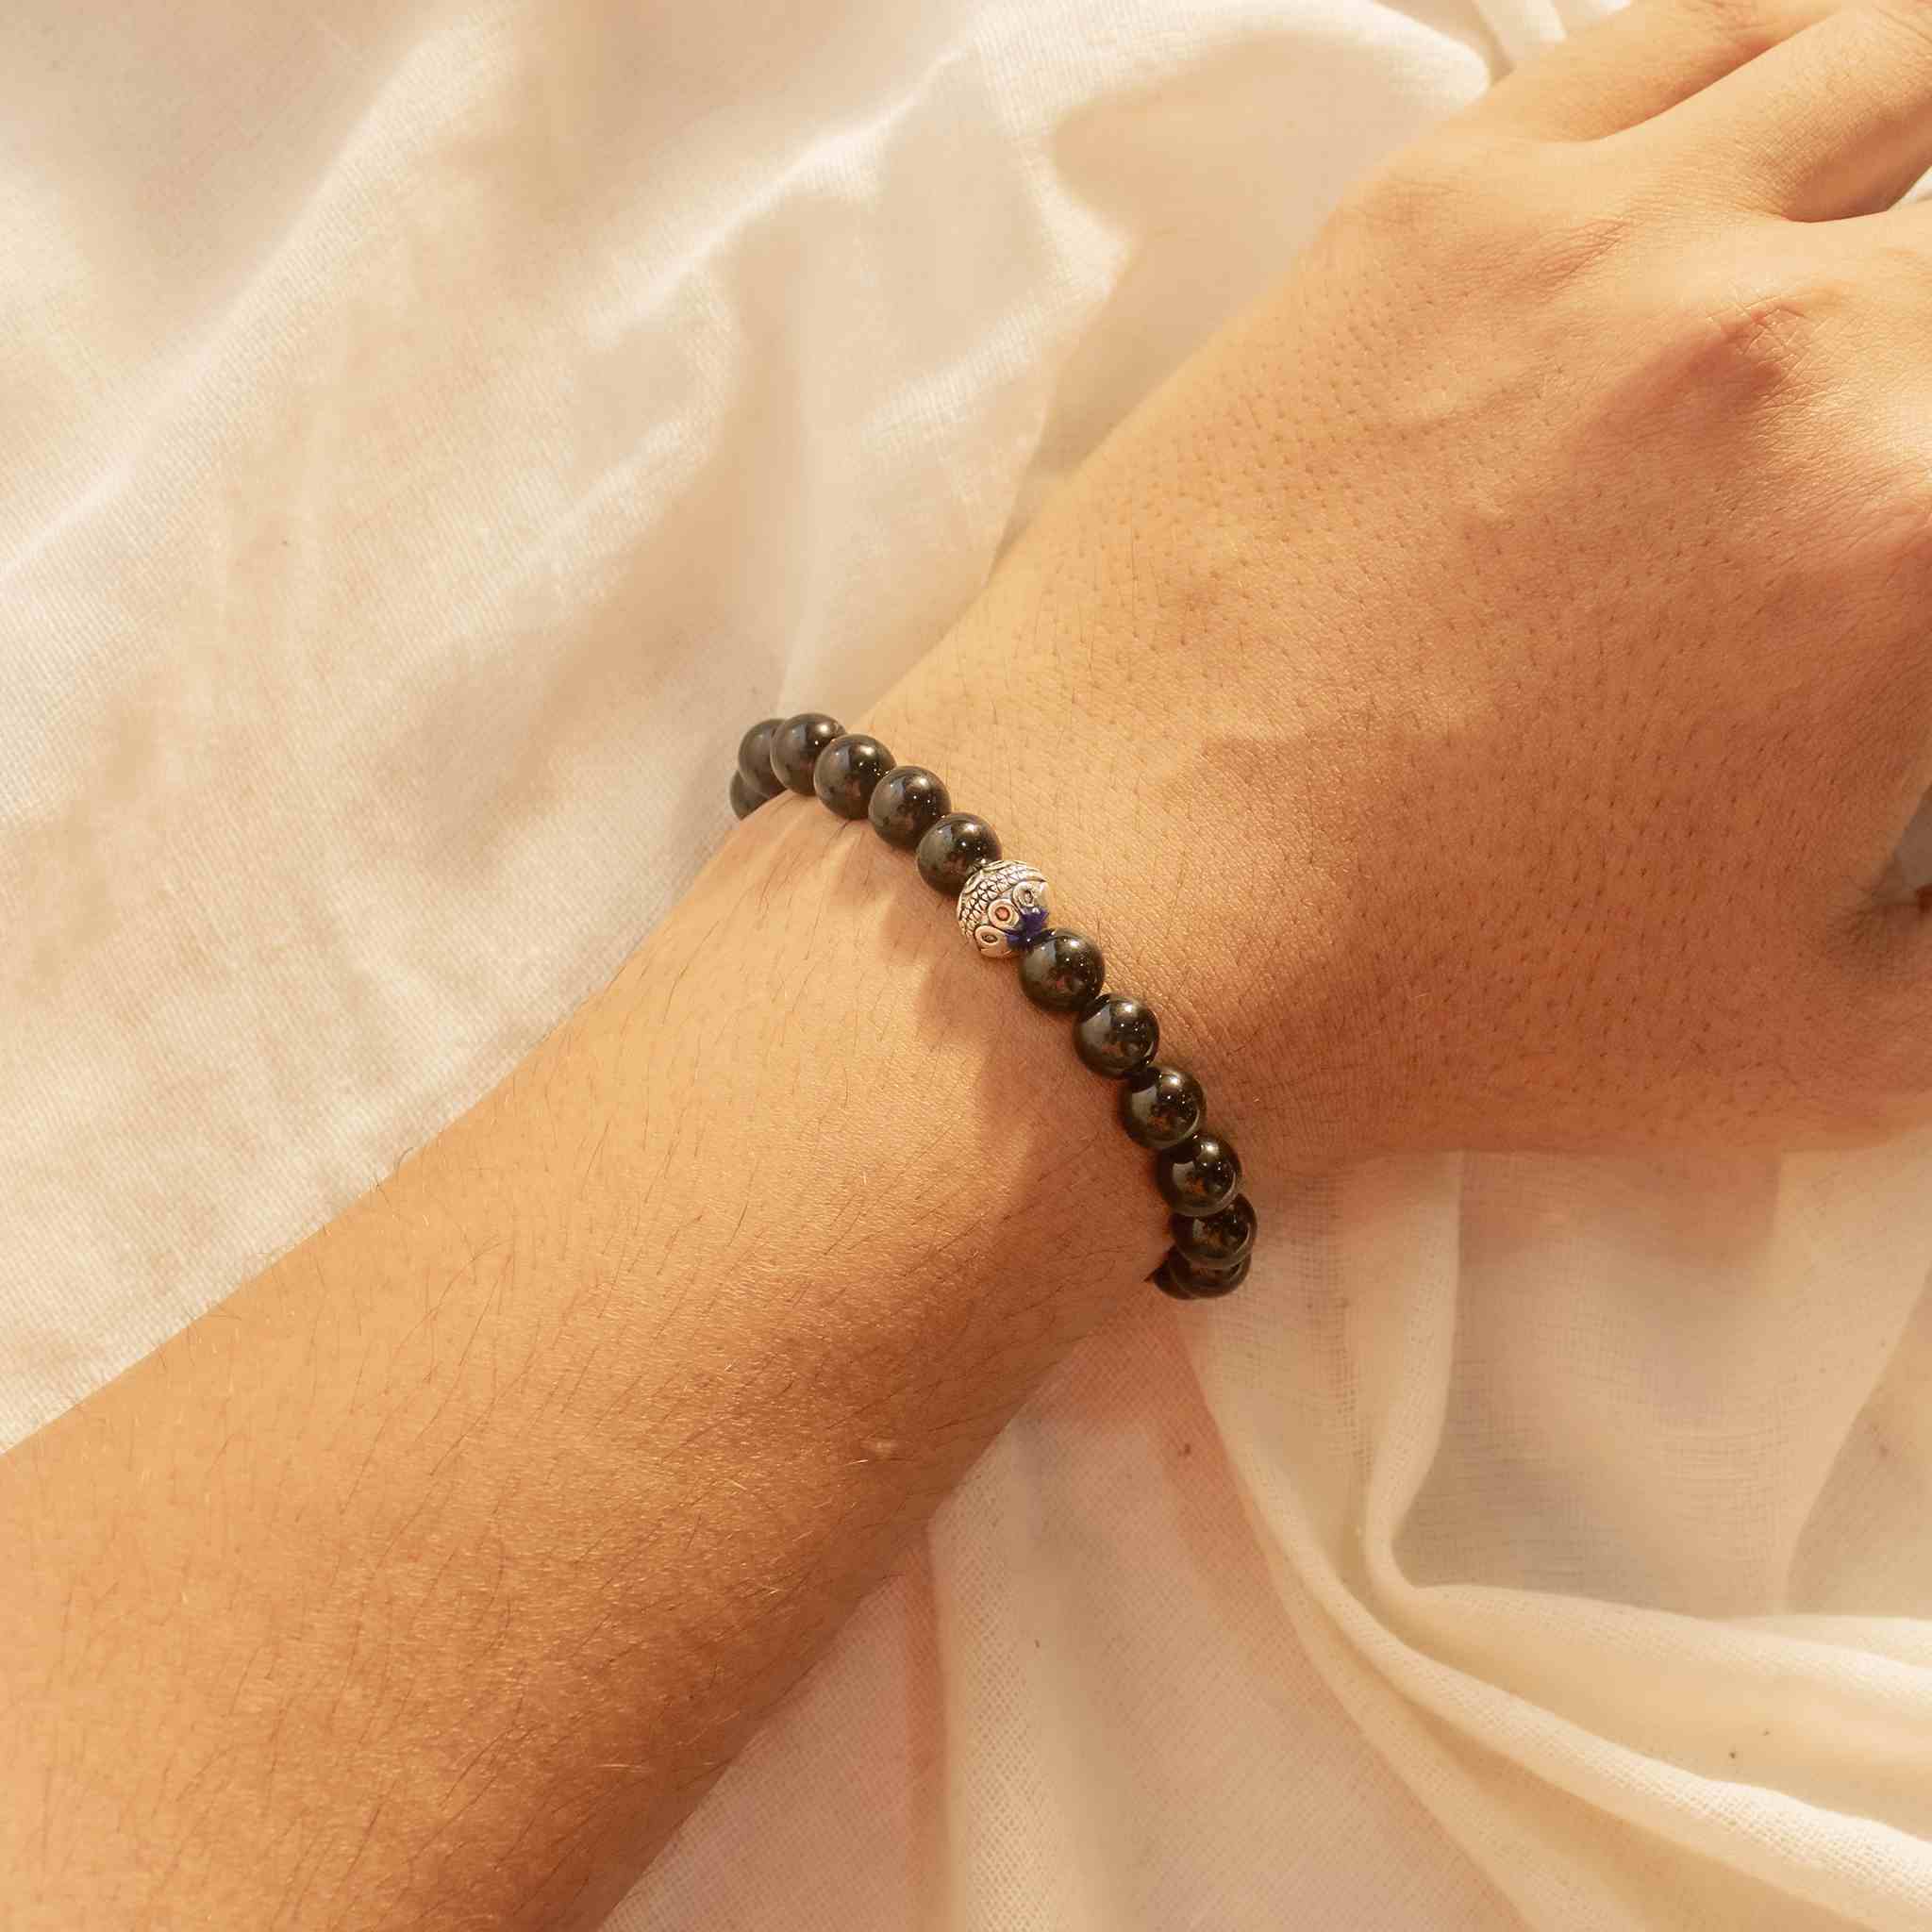 Black Tourmaline and Selenite Bracelet for Healing - Solacely